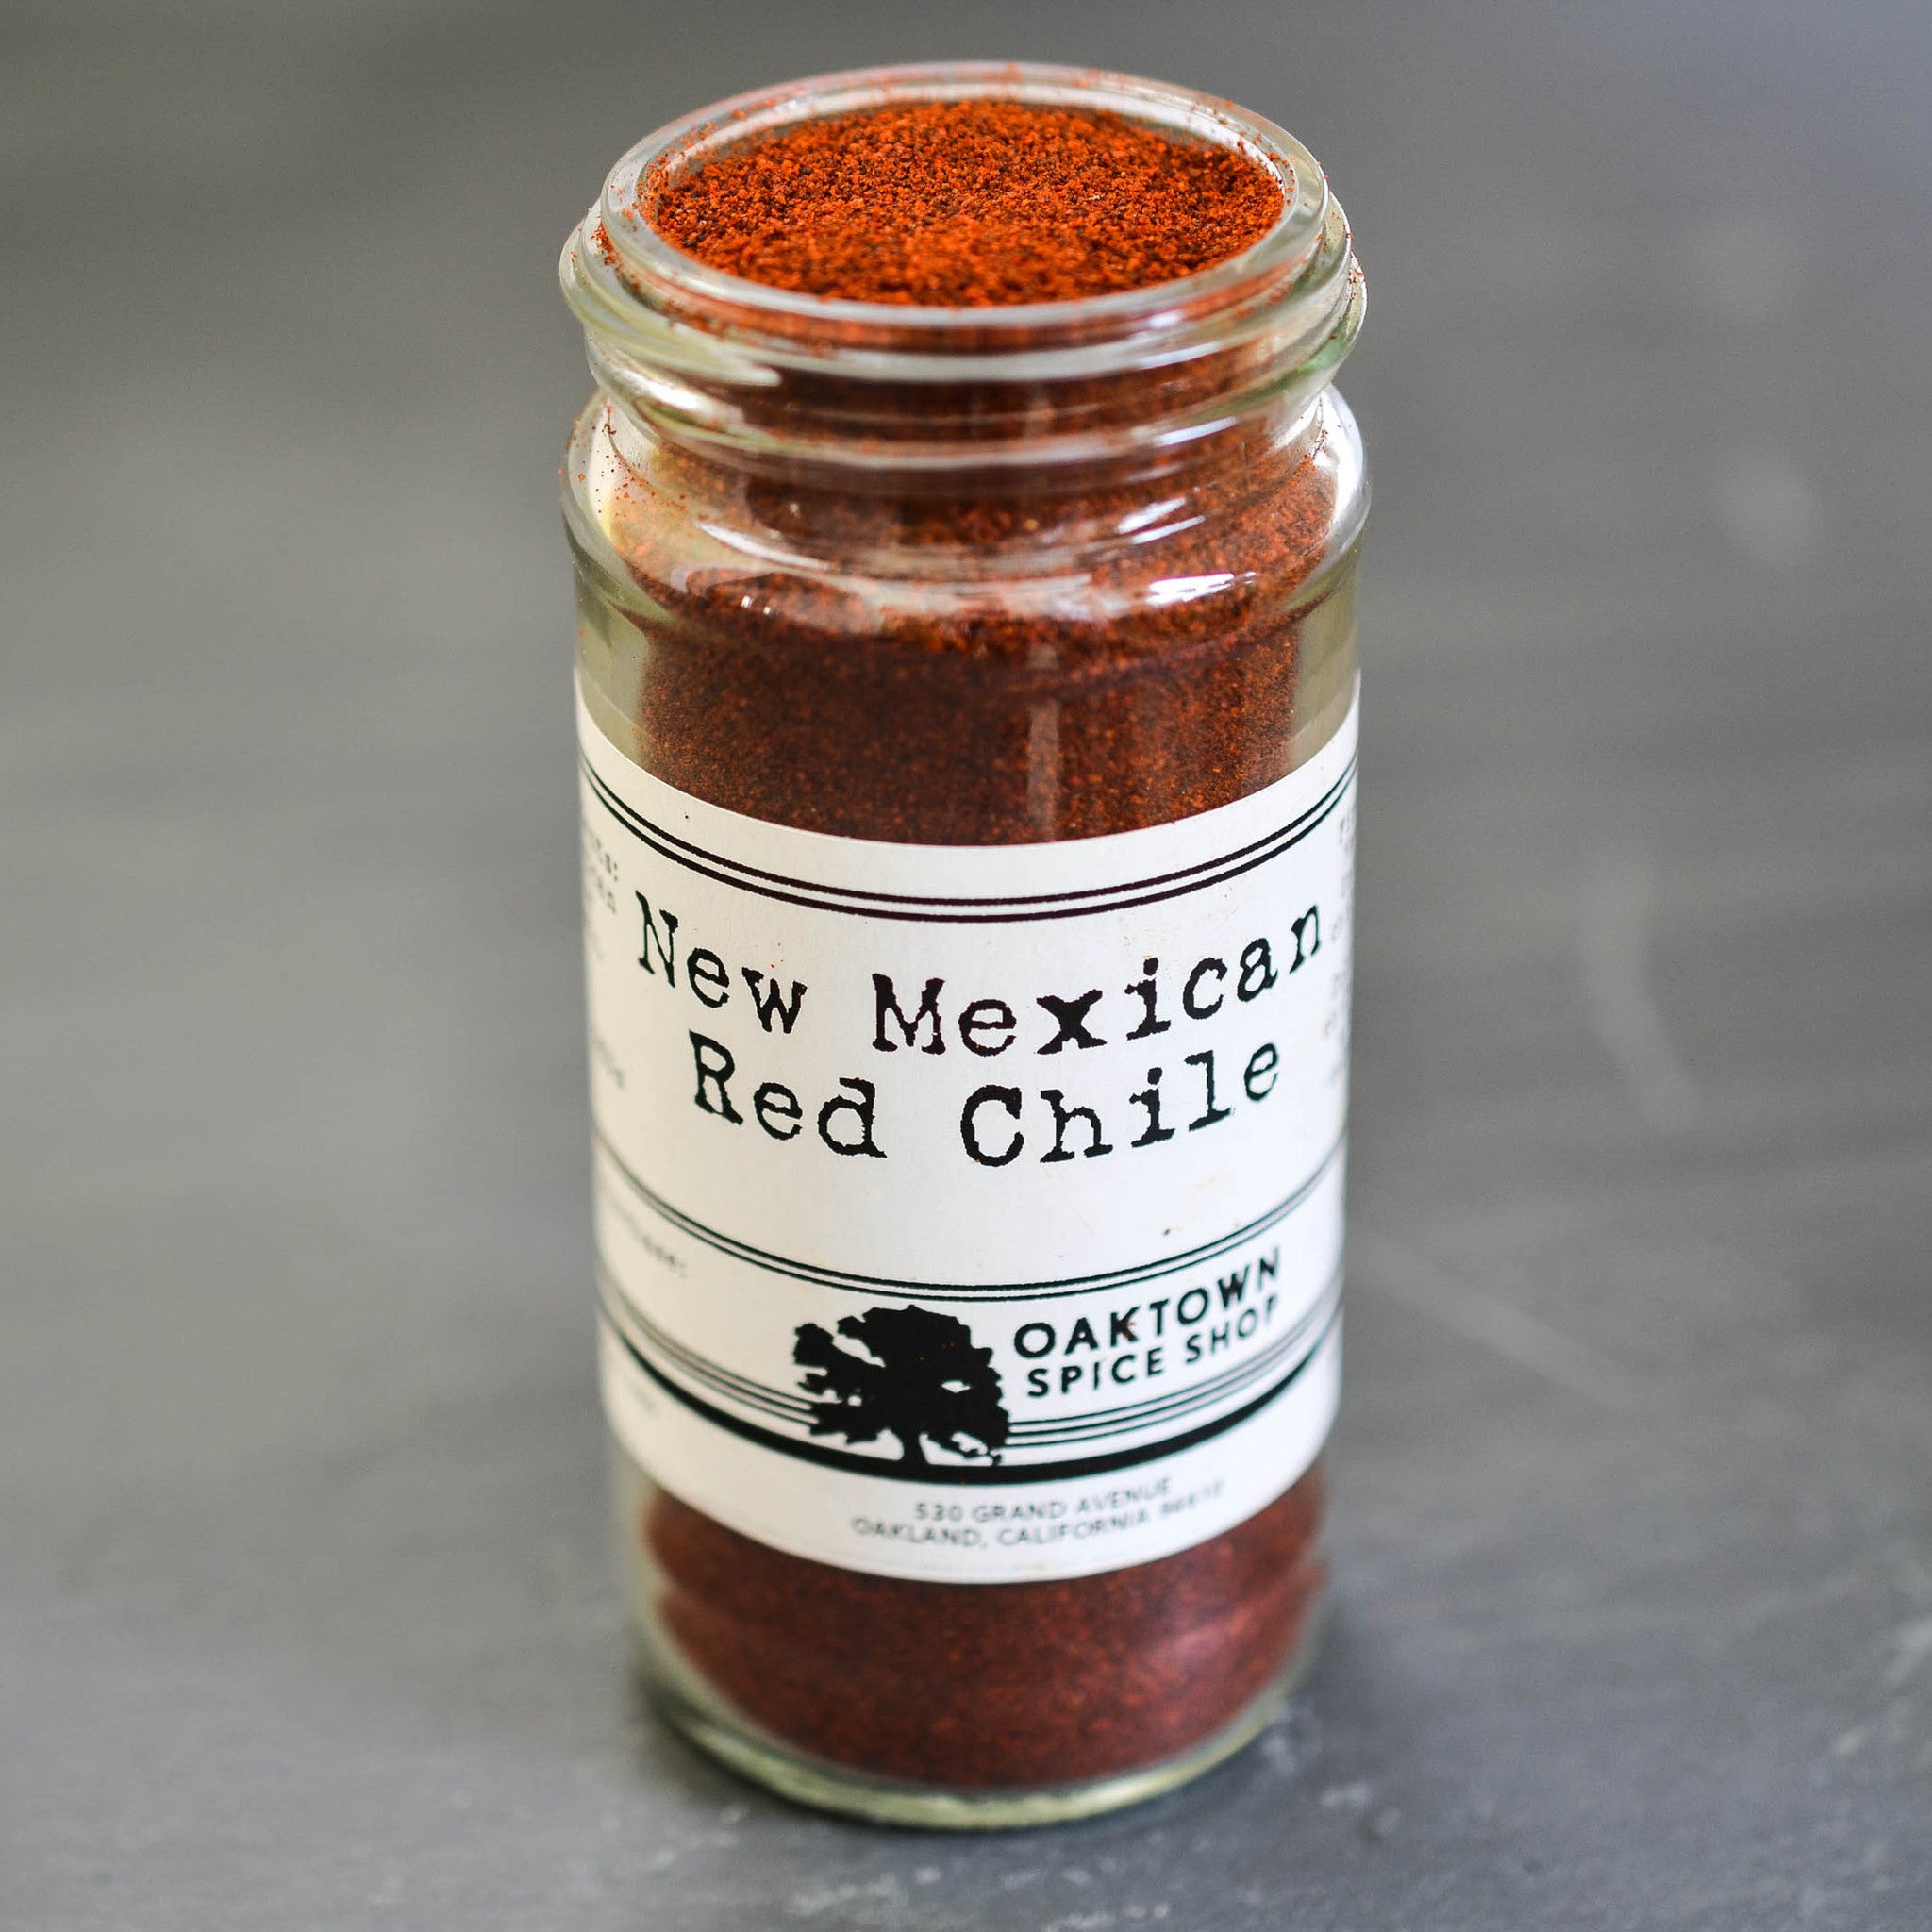 Ground New Mexican Red Chile